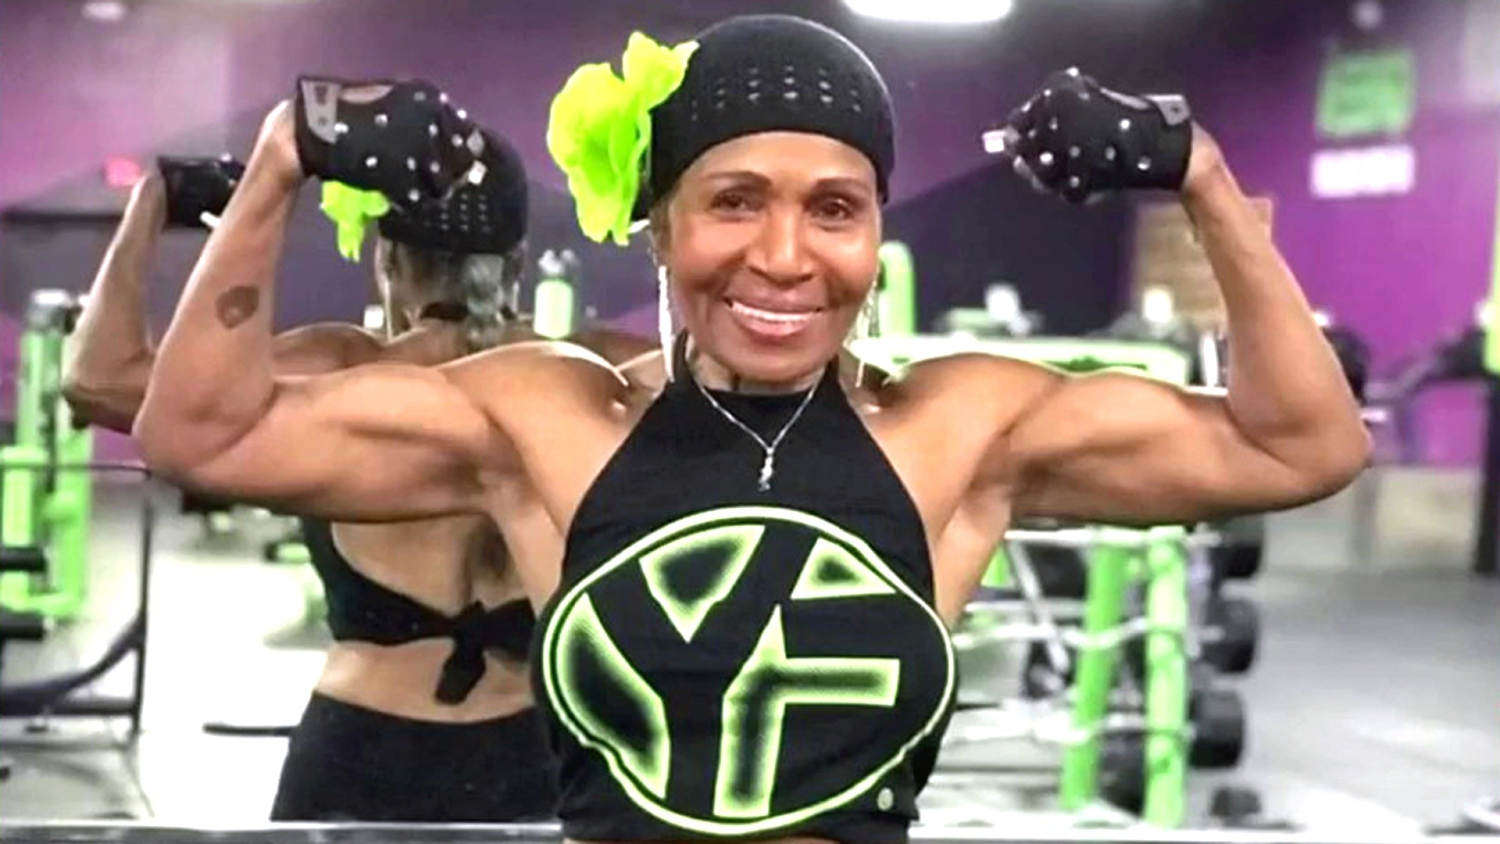 Meet the 80-year-old bodybuilder who started working out at 56